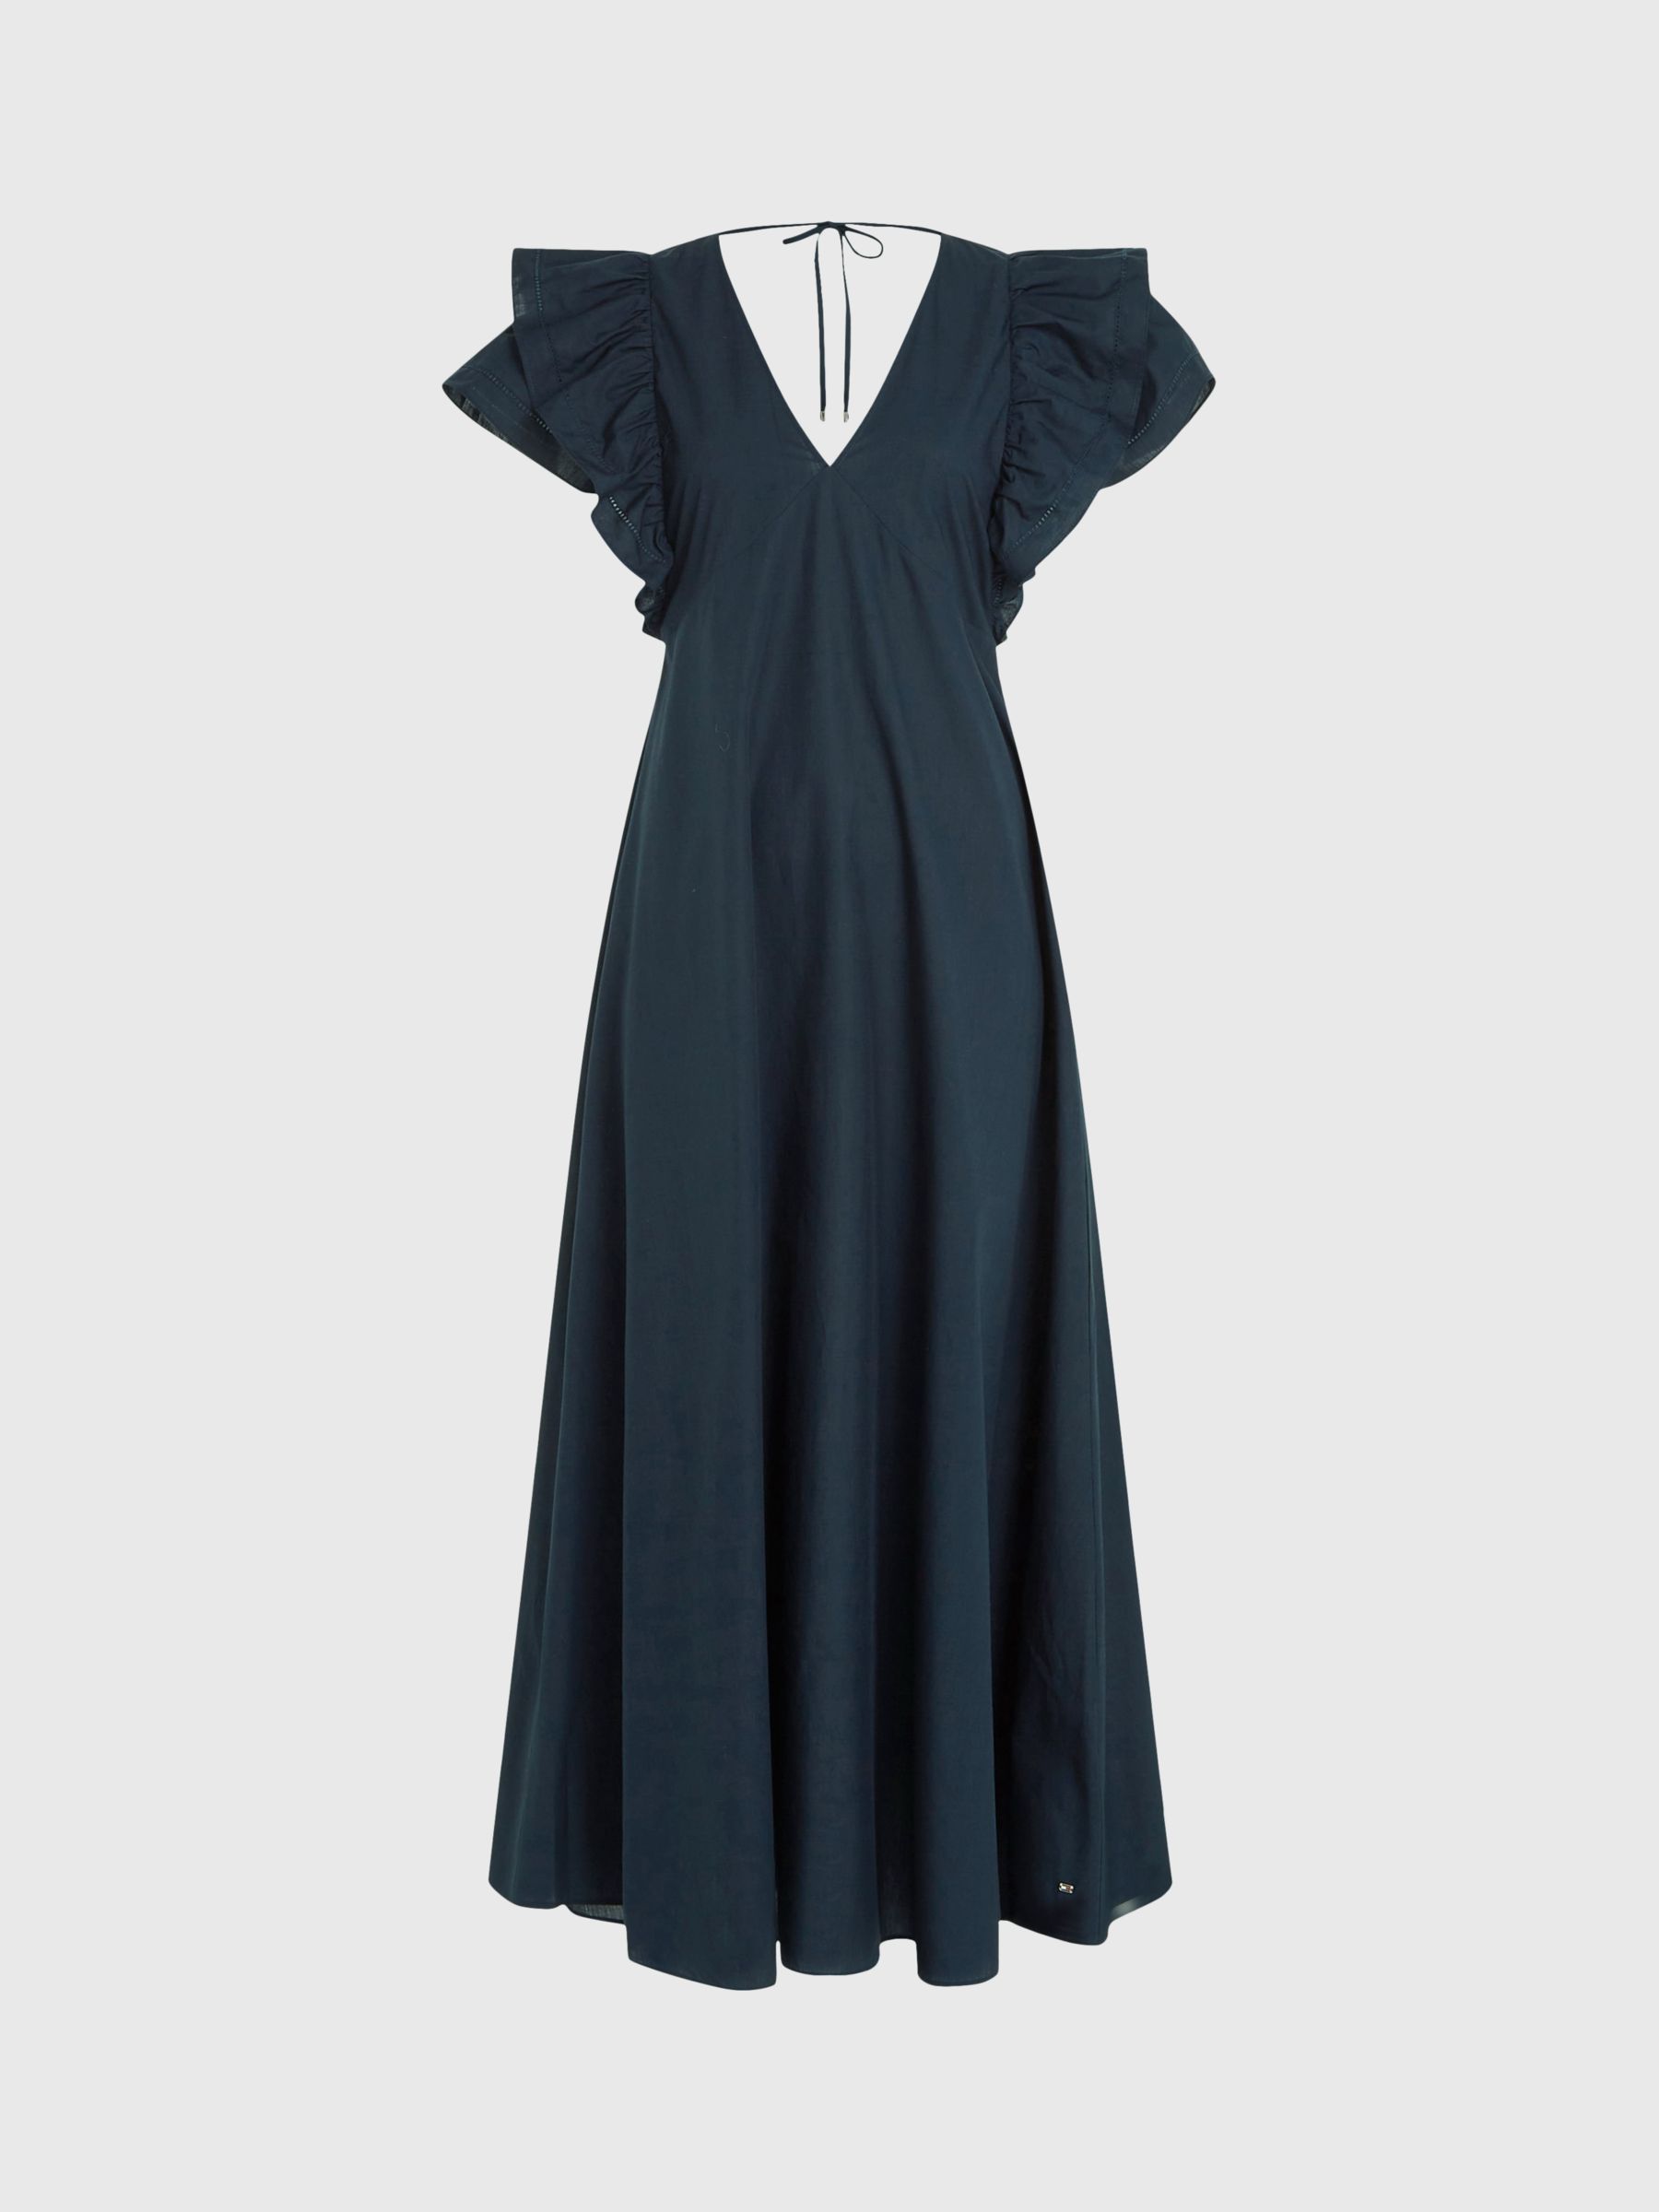 Tommy Hilfiger Sateen Frill Dresses, Navy at John Lewis & Partners